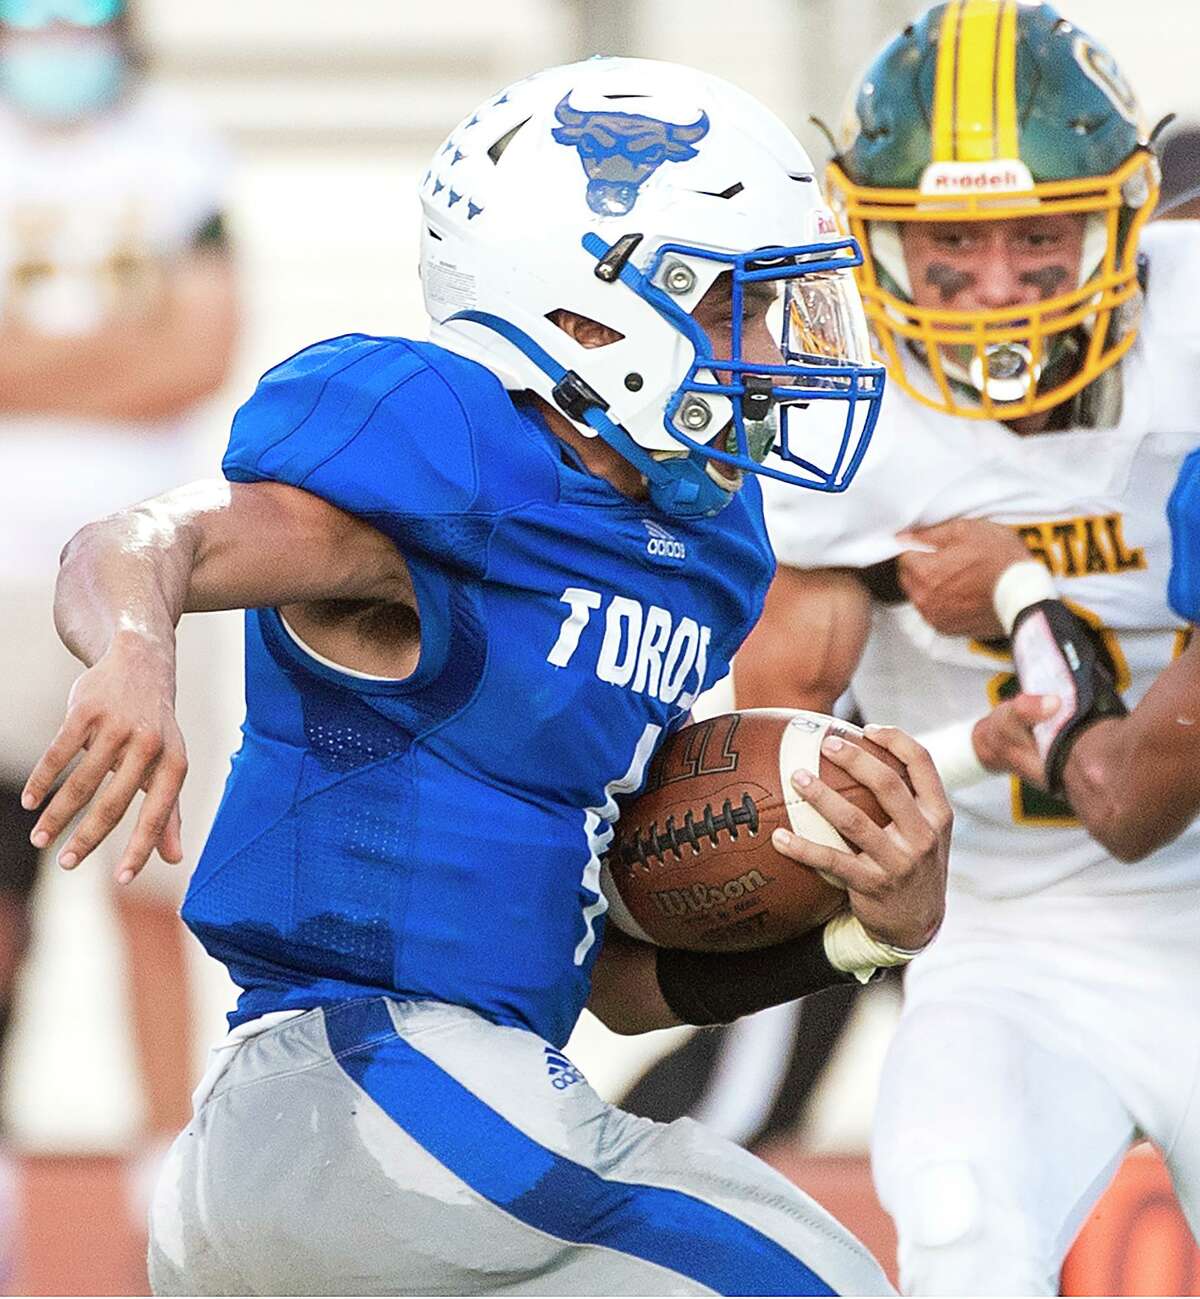 Ya-aqob Lozano ran for four touchdowns as Cigarroa claimed its third-straight victory thanks to a win over Crystal City on Friday.